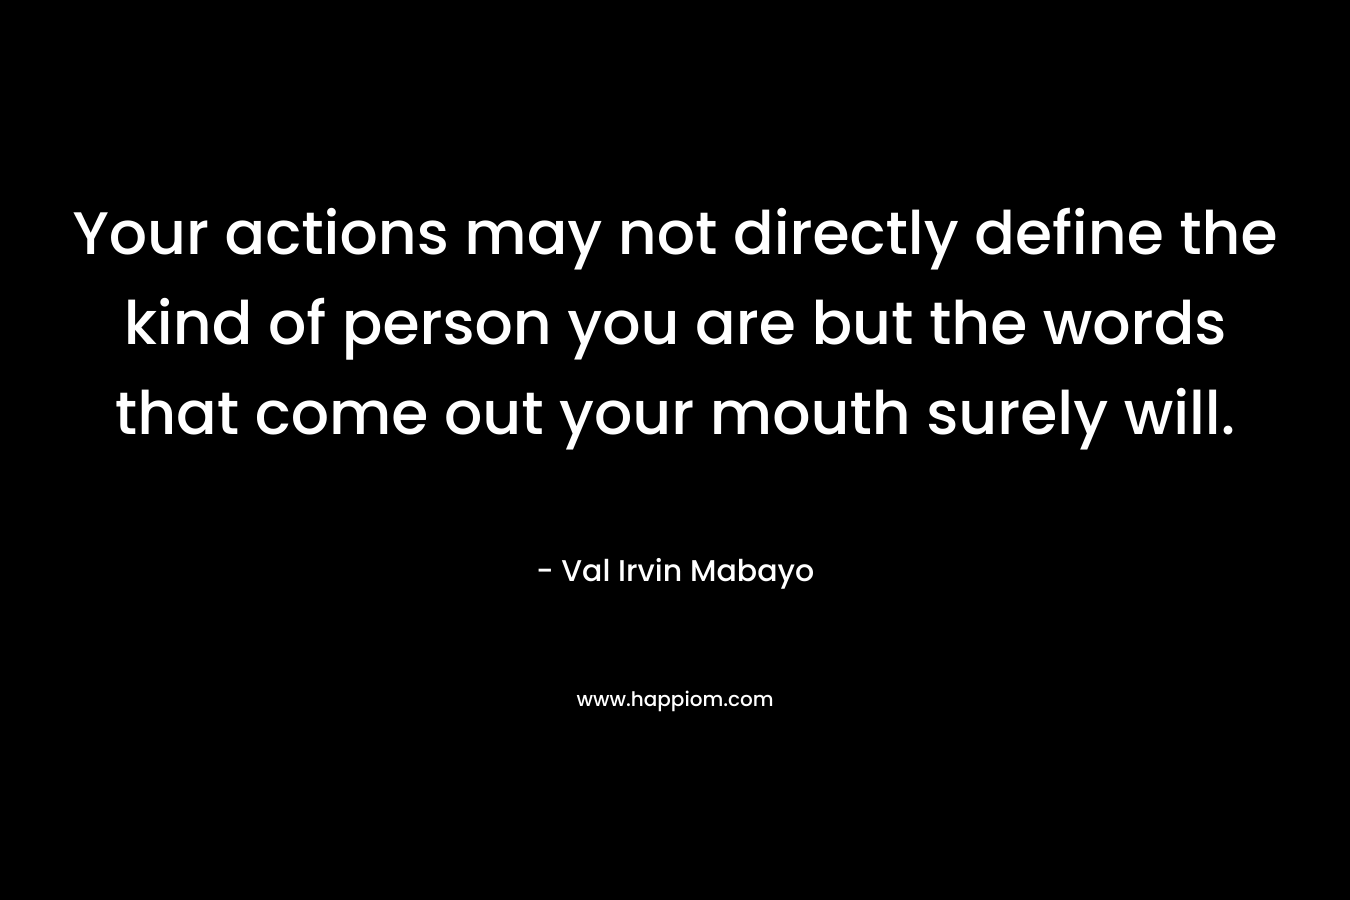 Your actions may not directly define the kind of person you are but the words that come out your mouth surely will.